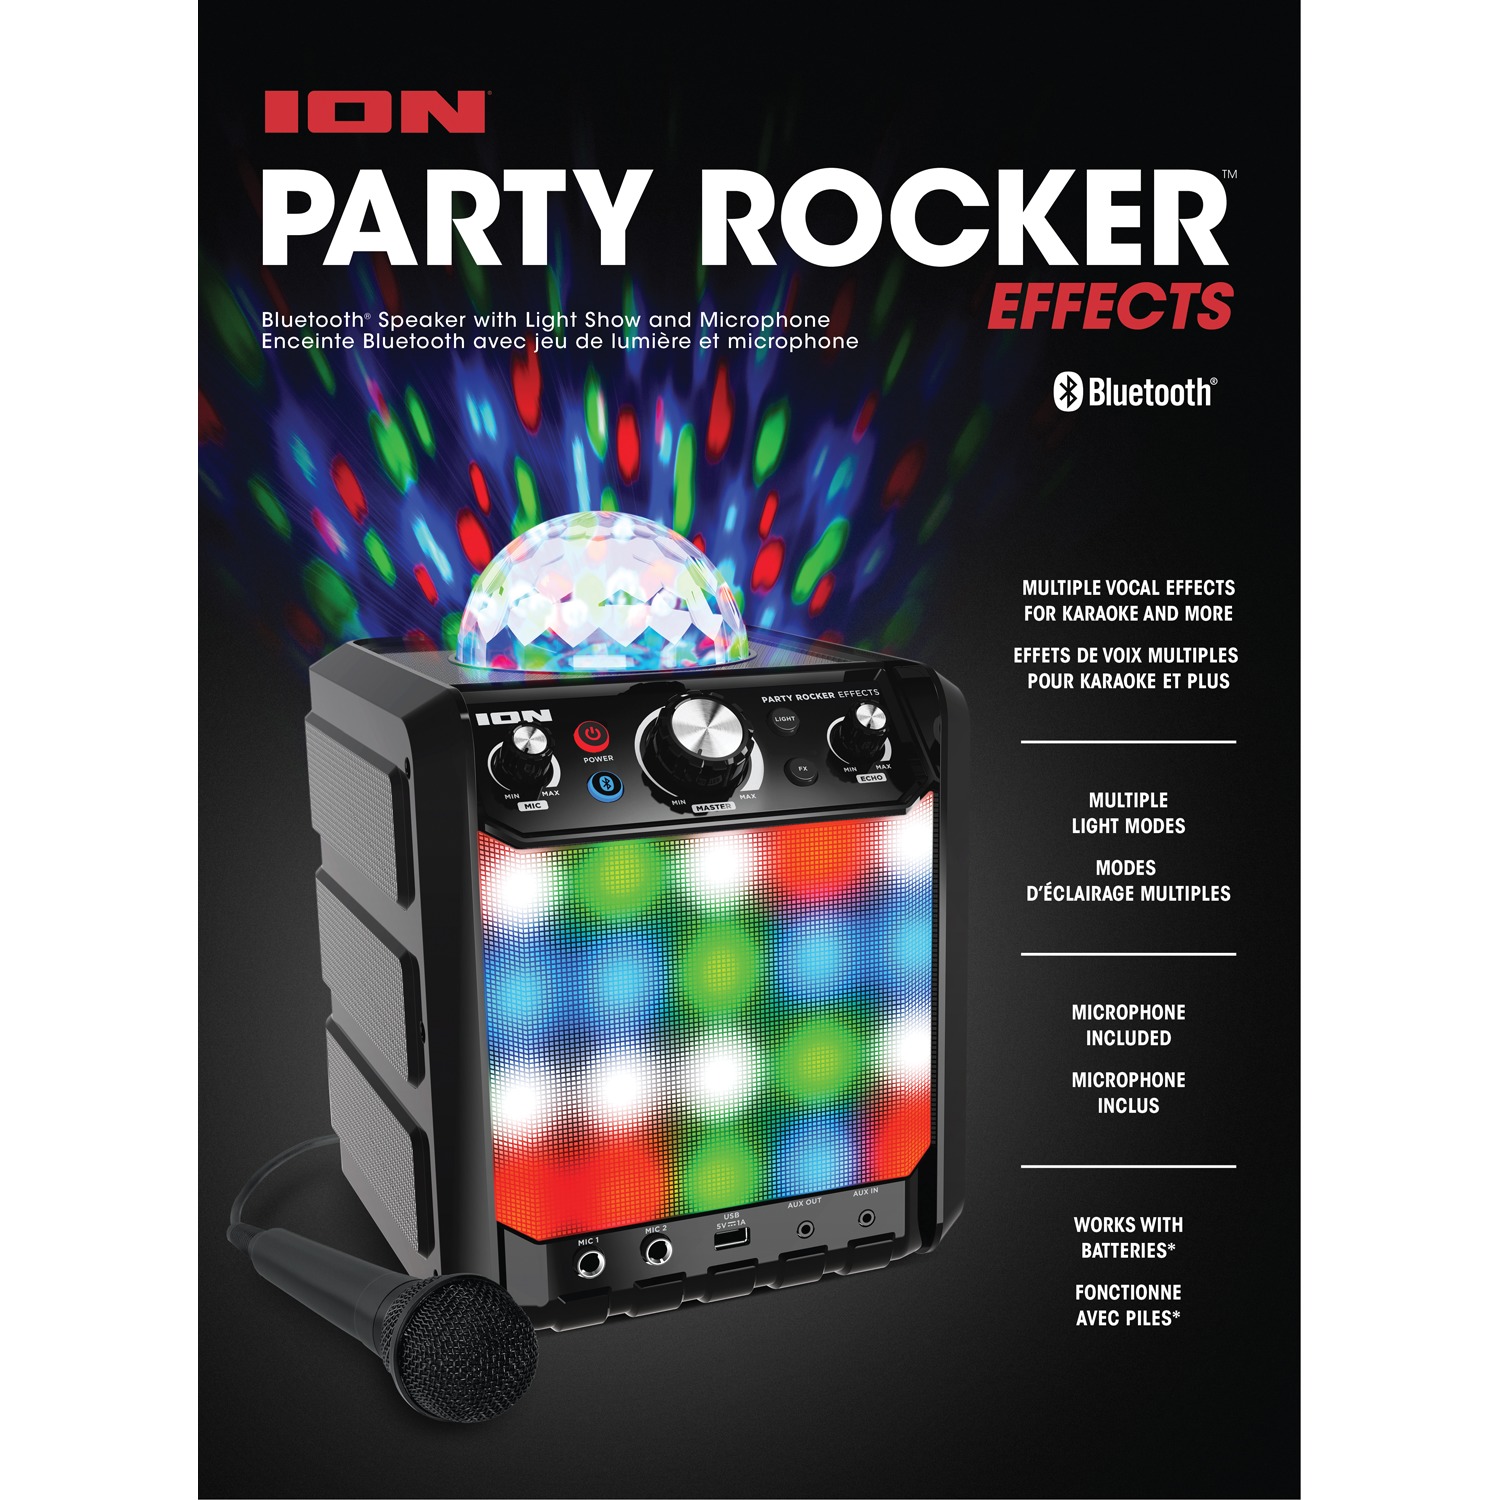 ION Audio Party Rocker Effects Black - Bluetooth Speaker with Light Show and Microphone - image 3 of 3